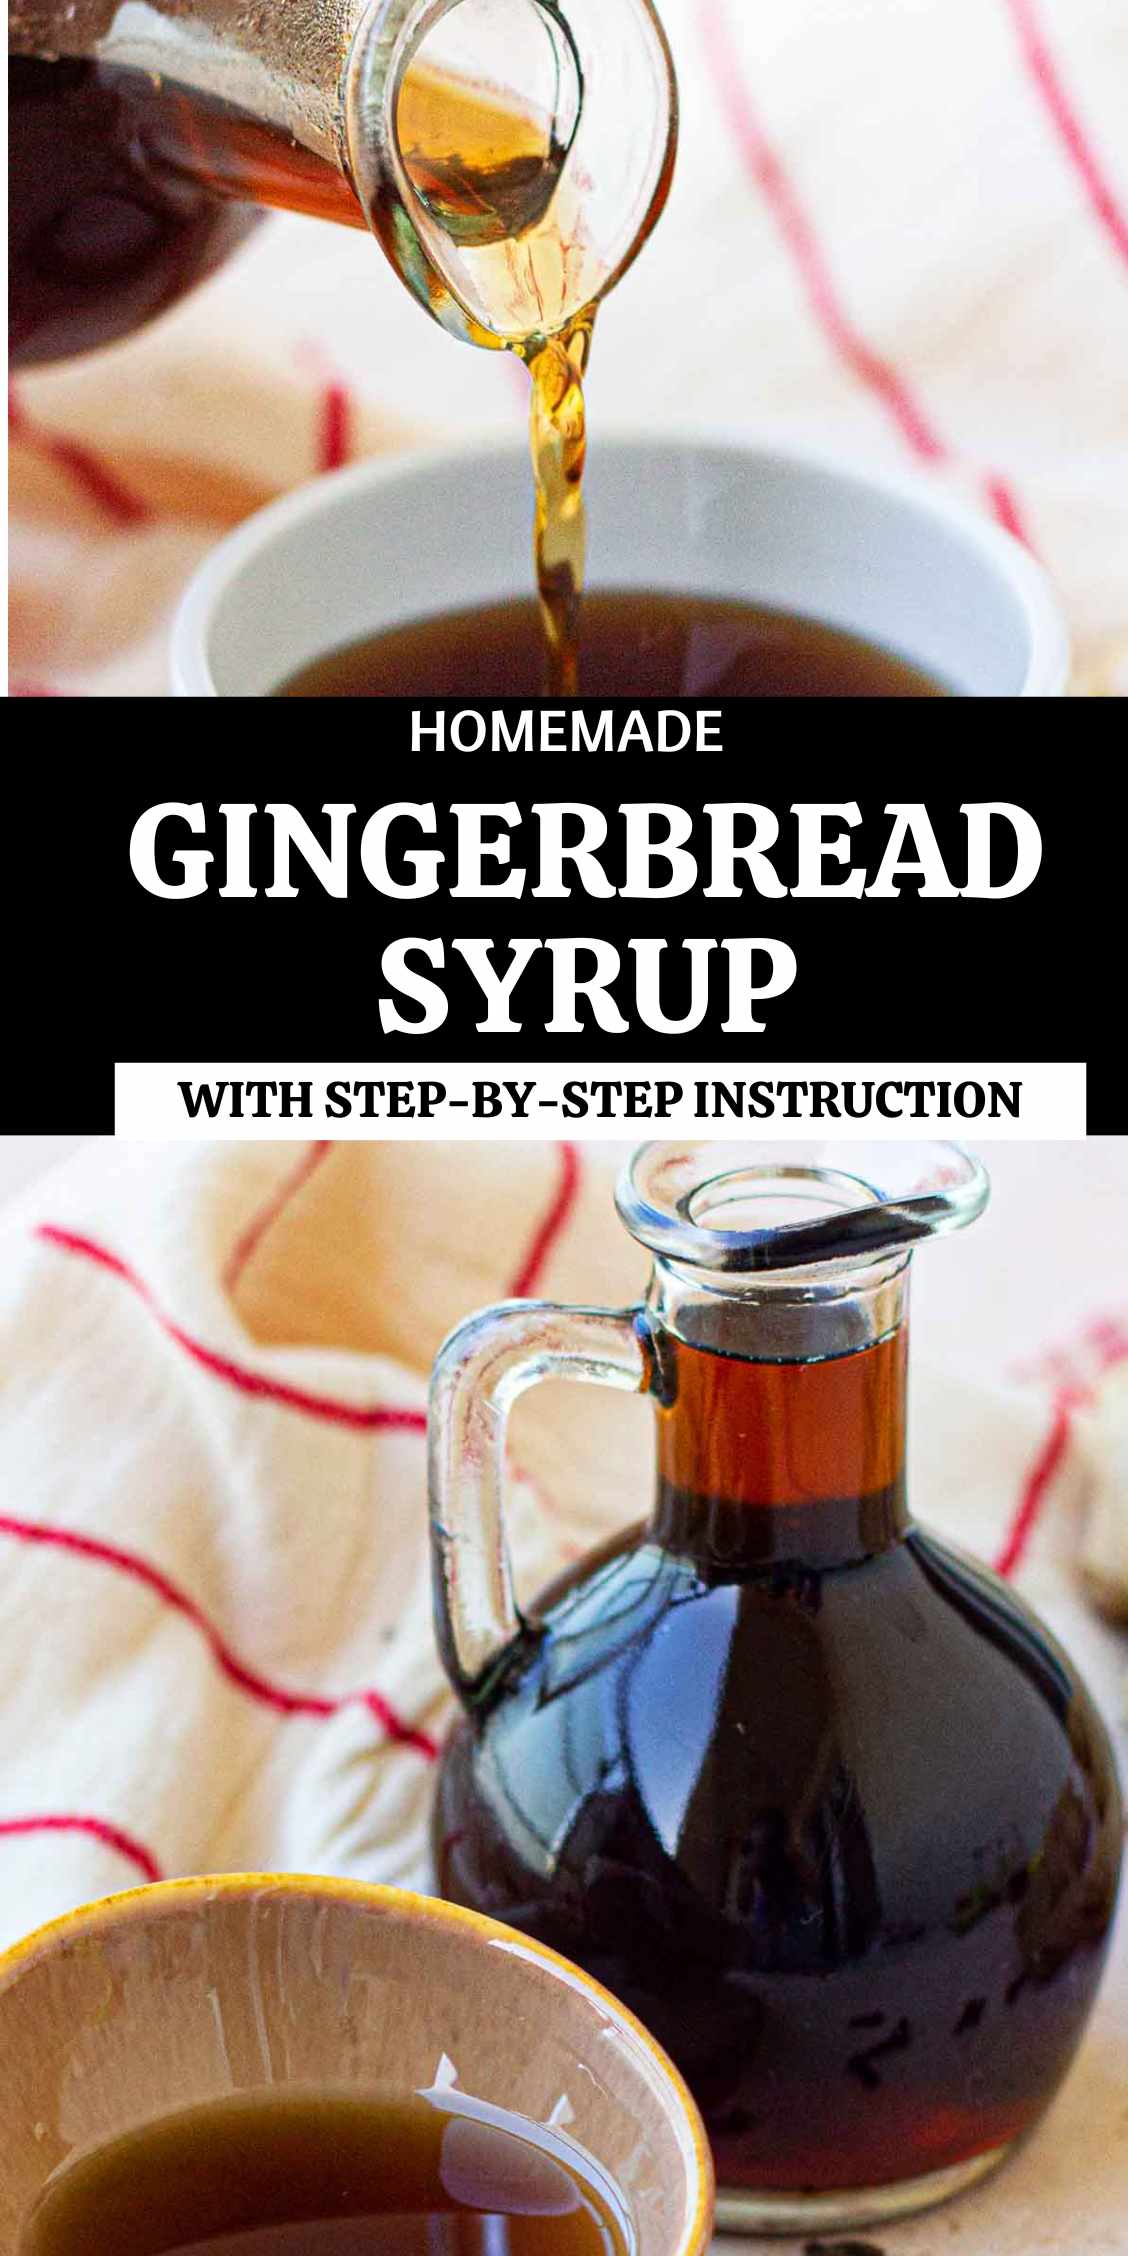 homemade gingerbread syrup uses